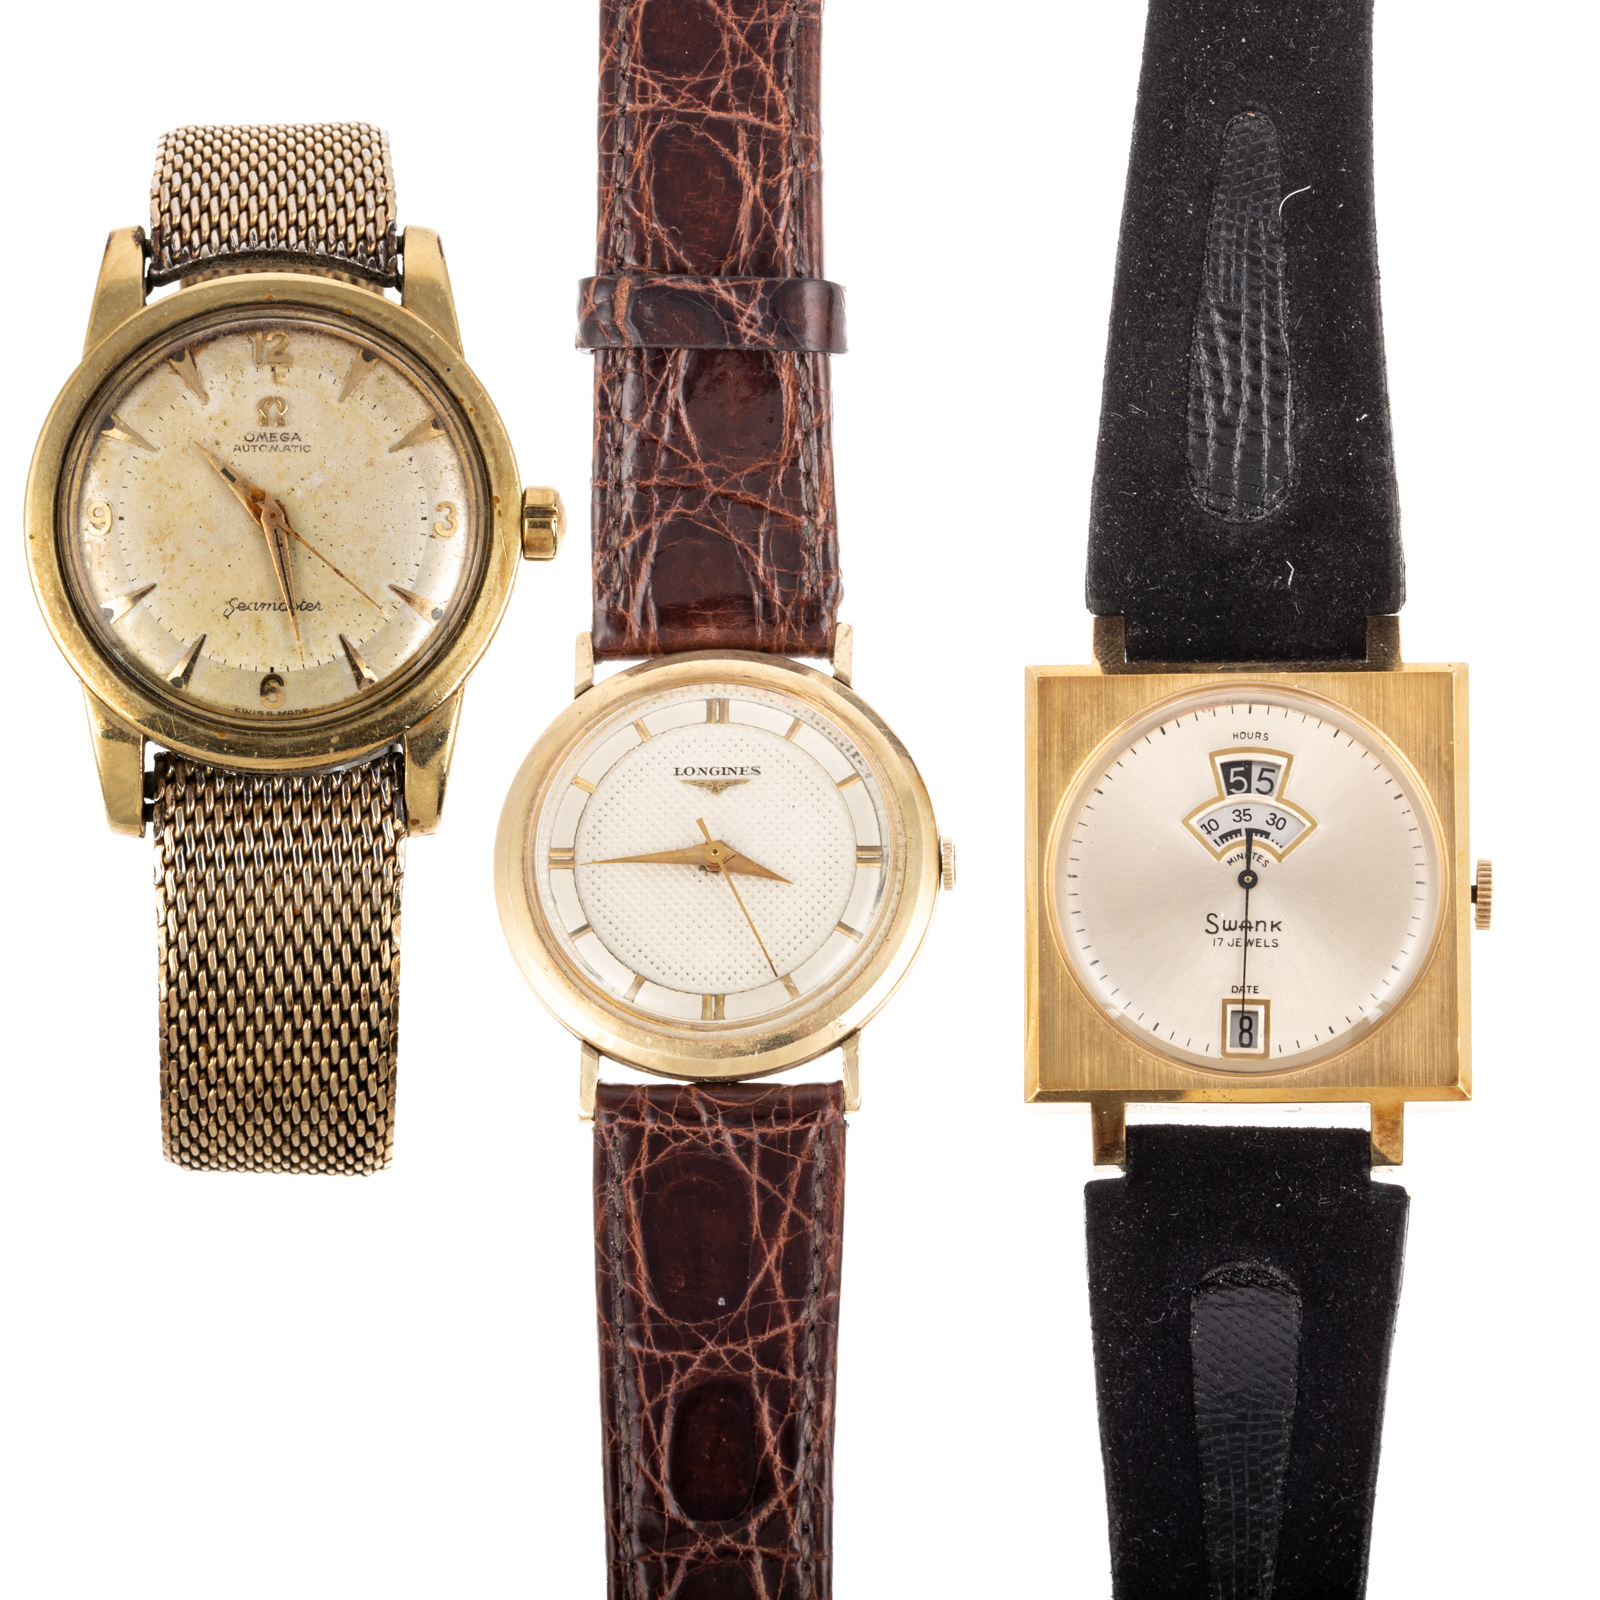 A COLLECTION OF VINTAGE WATCHES 2ea6e8